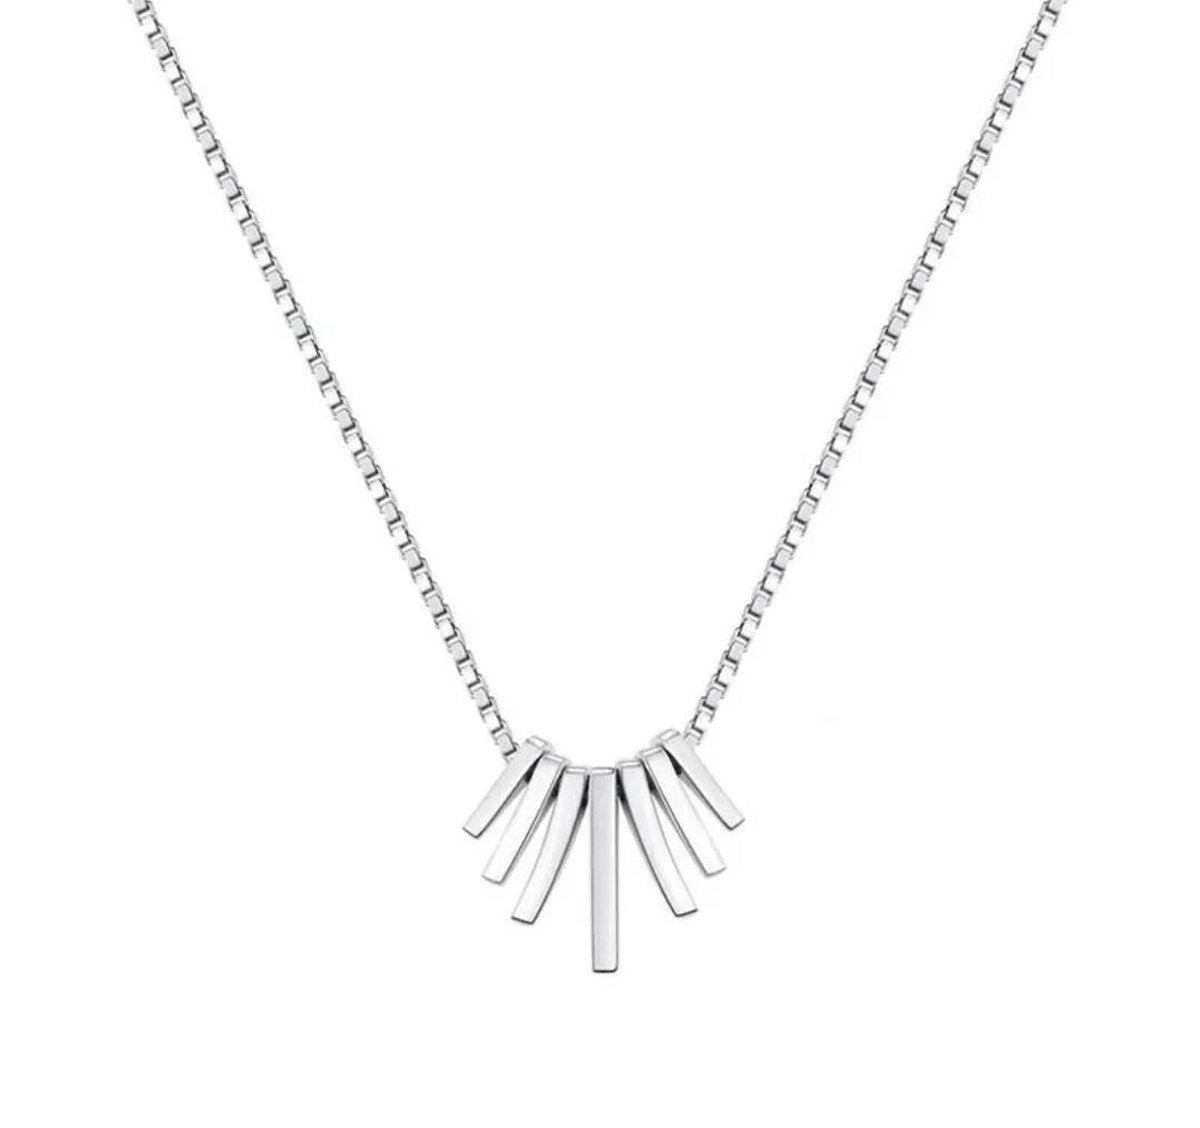 Ketting Dames- Zilver 925- Staafjes- Vrouw- LiLaLove